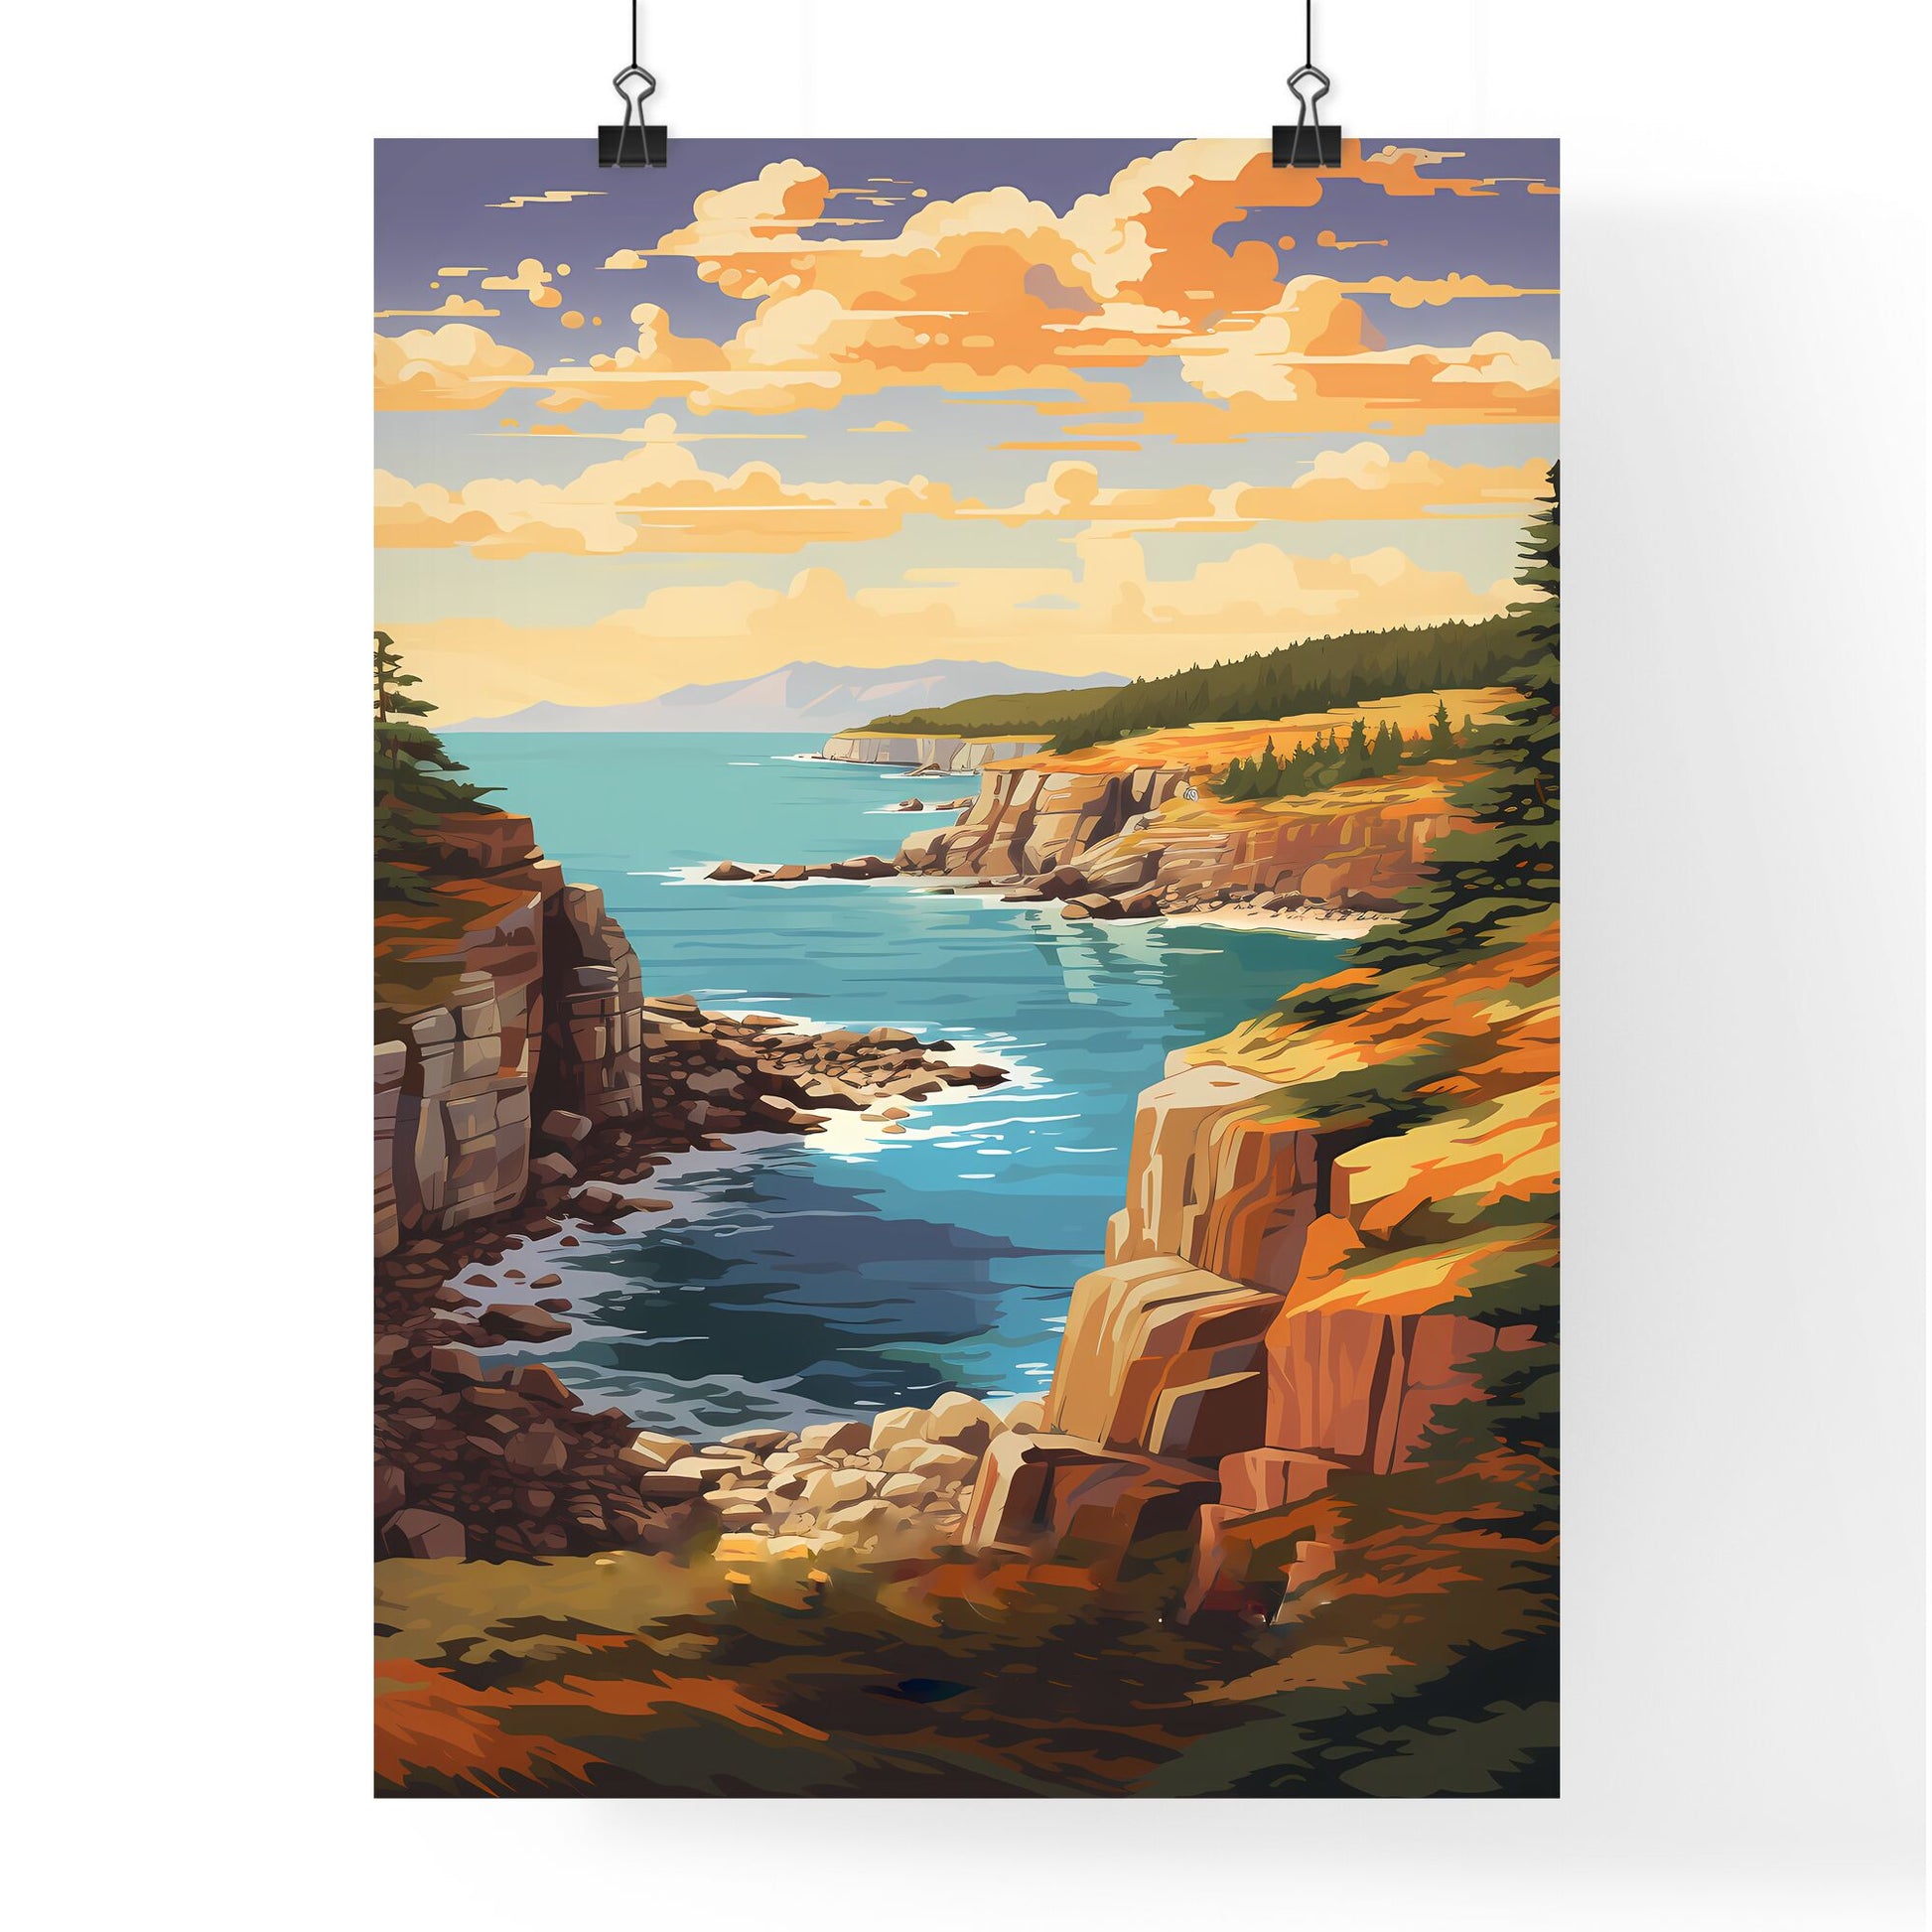 Landscape Of A Rocky Shore With Trees And A Body Of Water Art Print Default Title